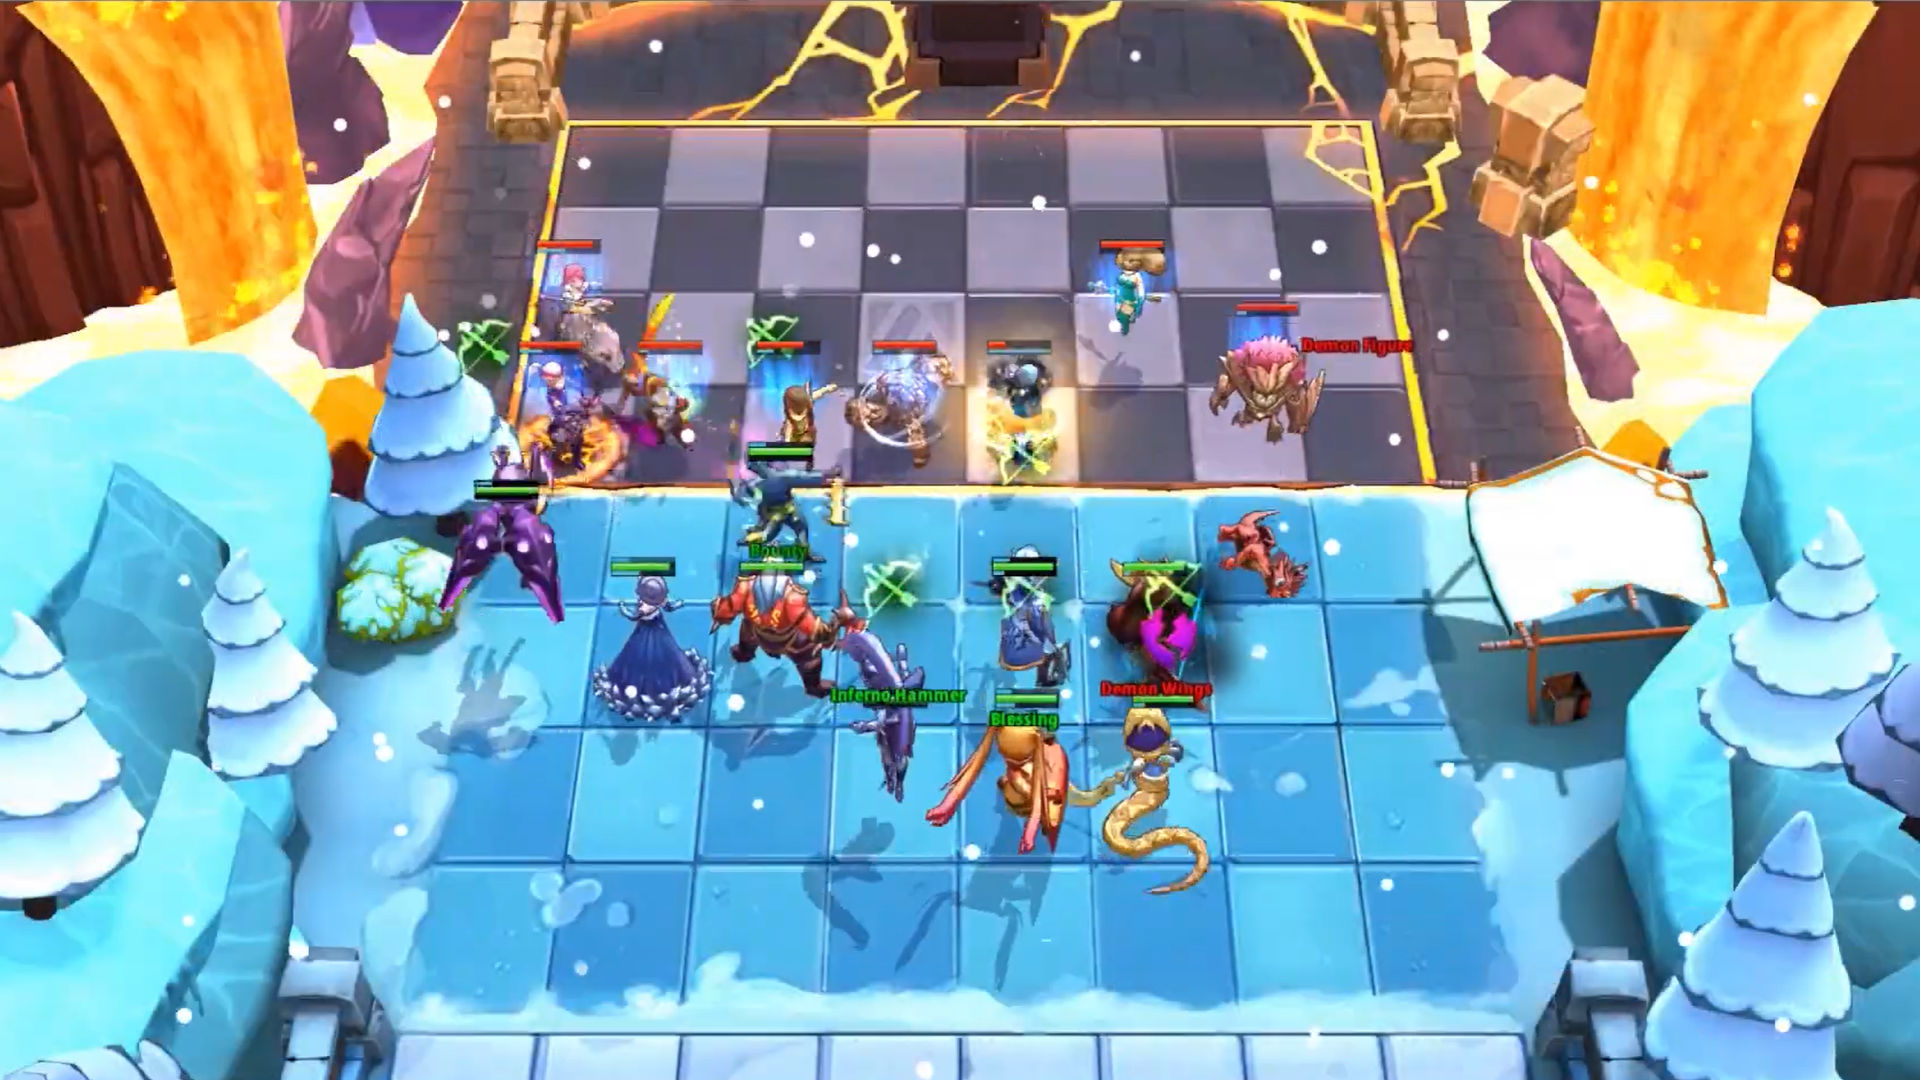 CHESS RUSH OFFICIAL TRAILER  NEW AUTO CHESS GAME BY TENCENT 